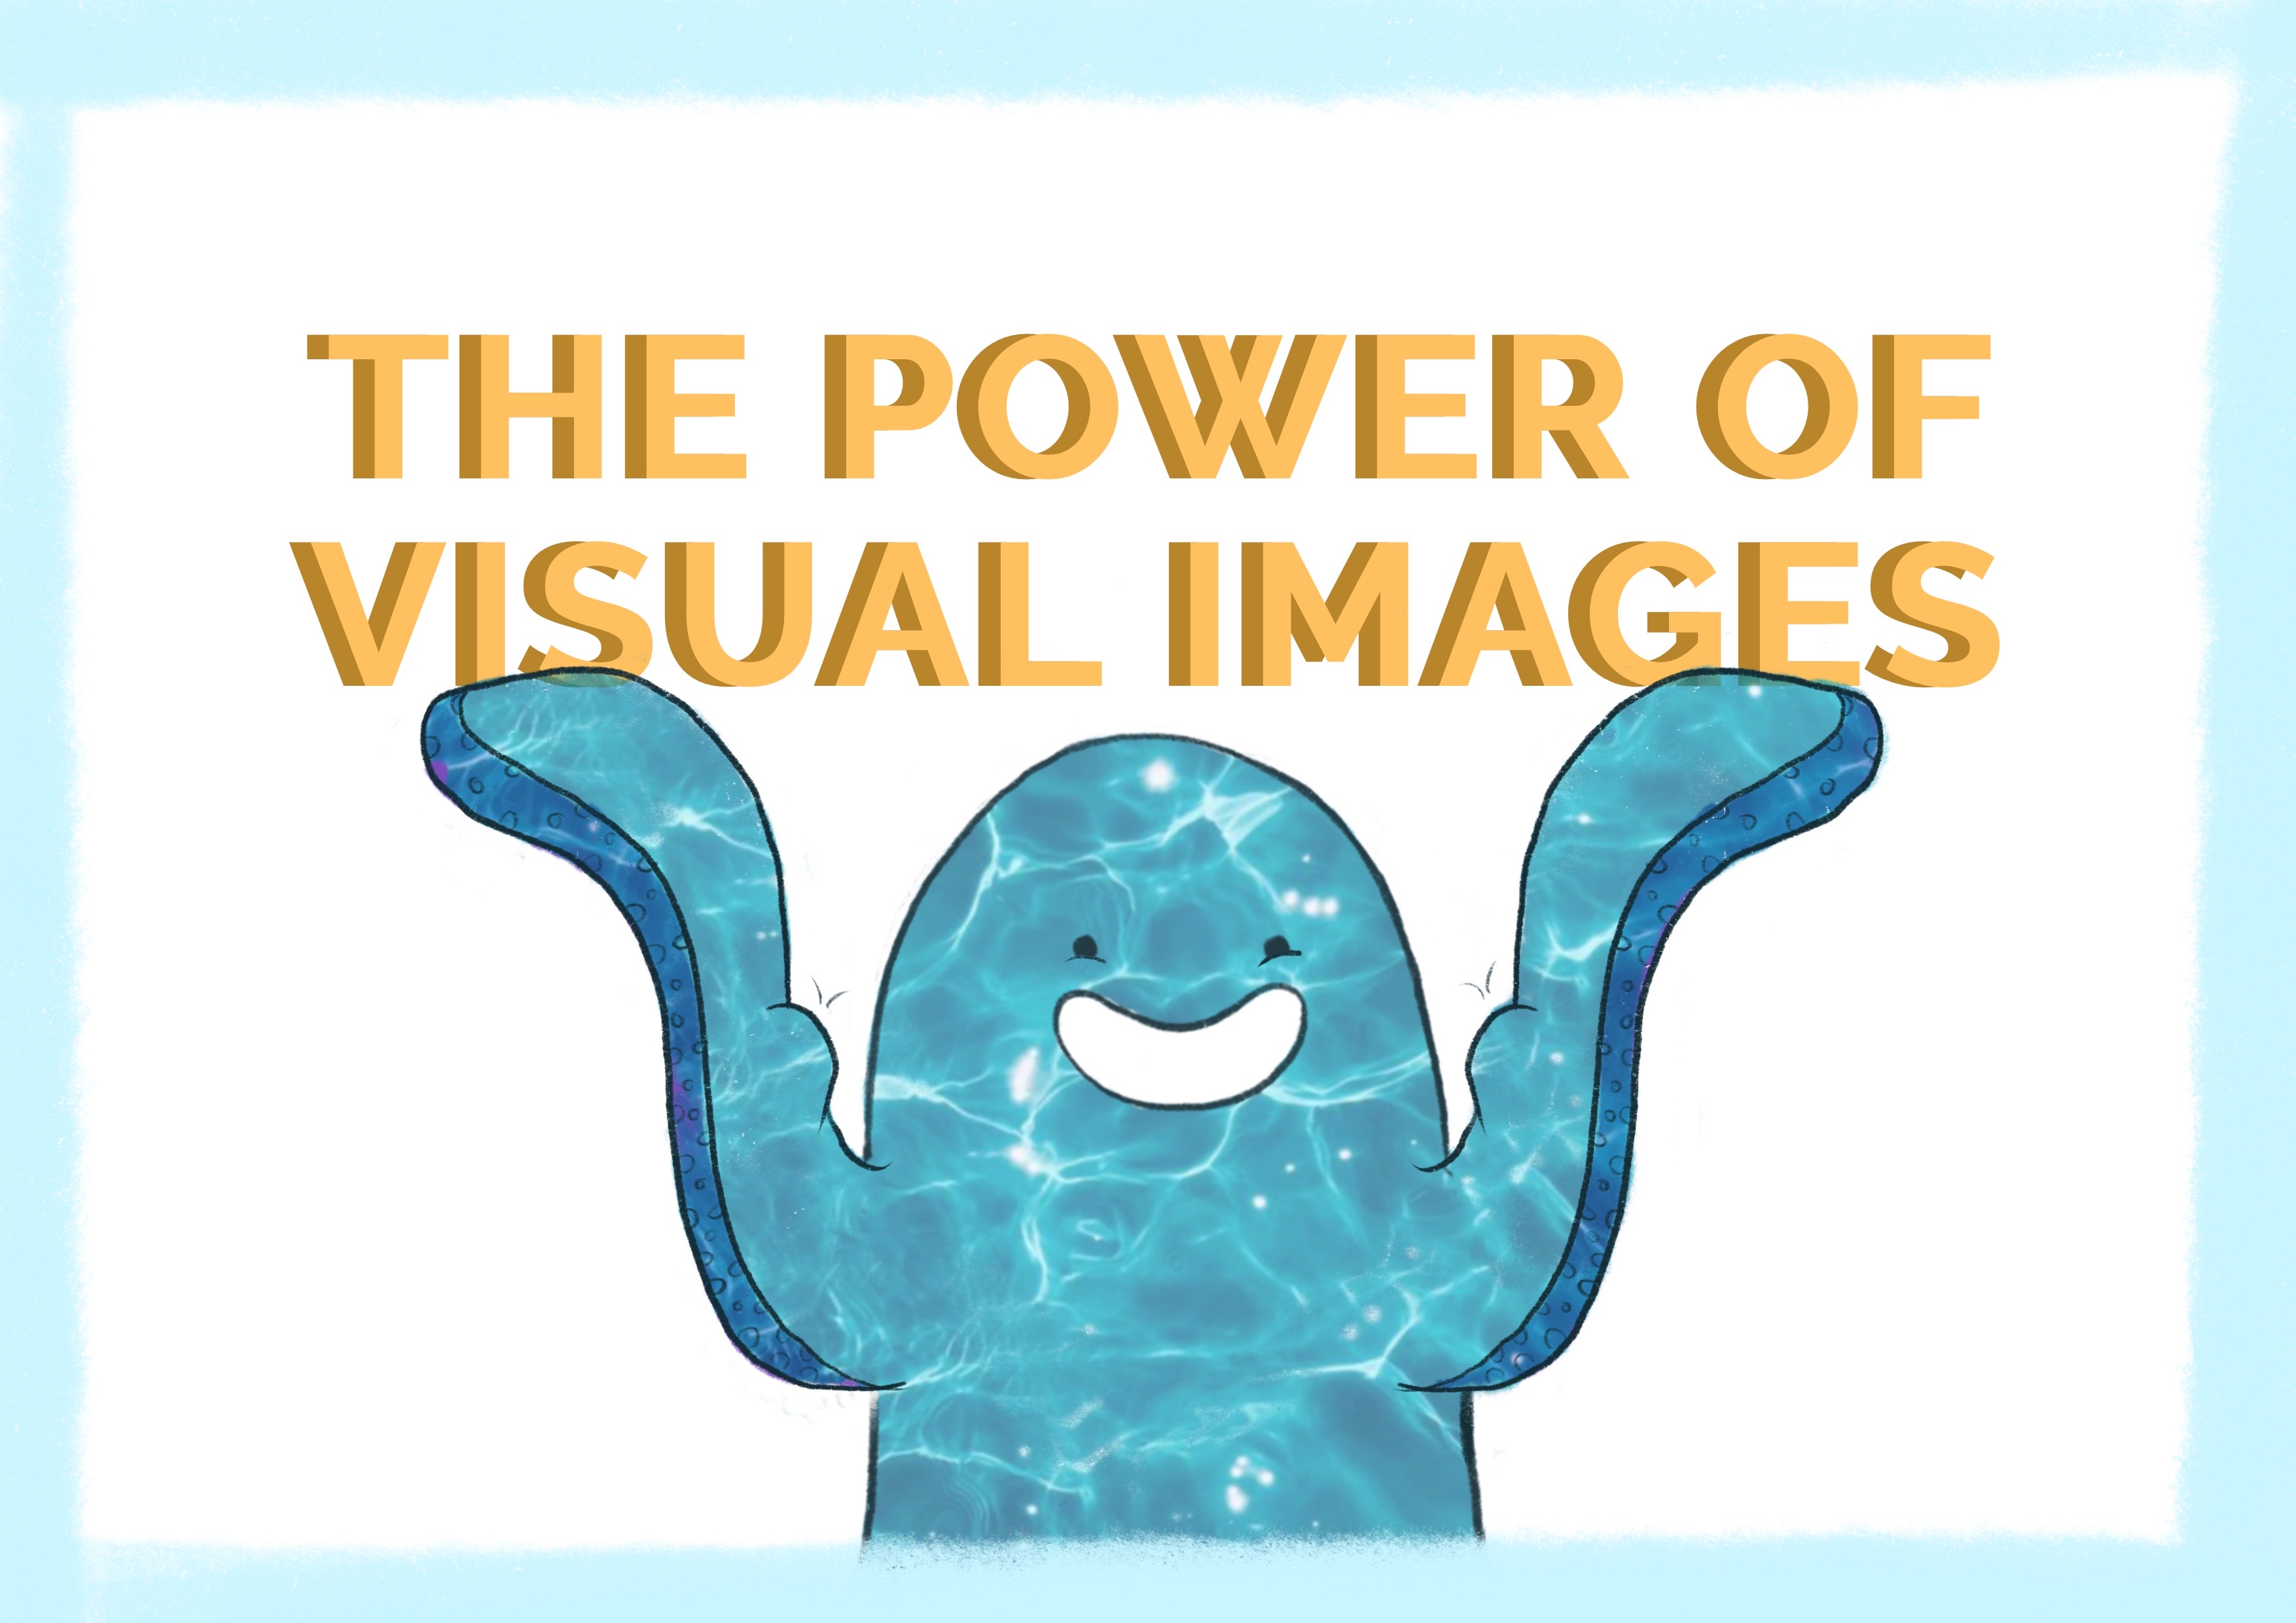 The power of visual images